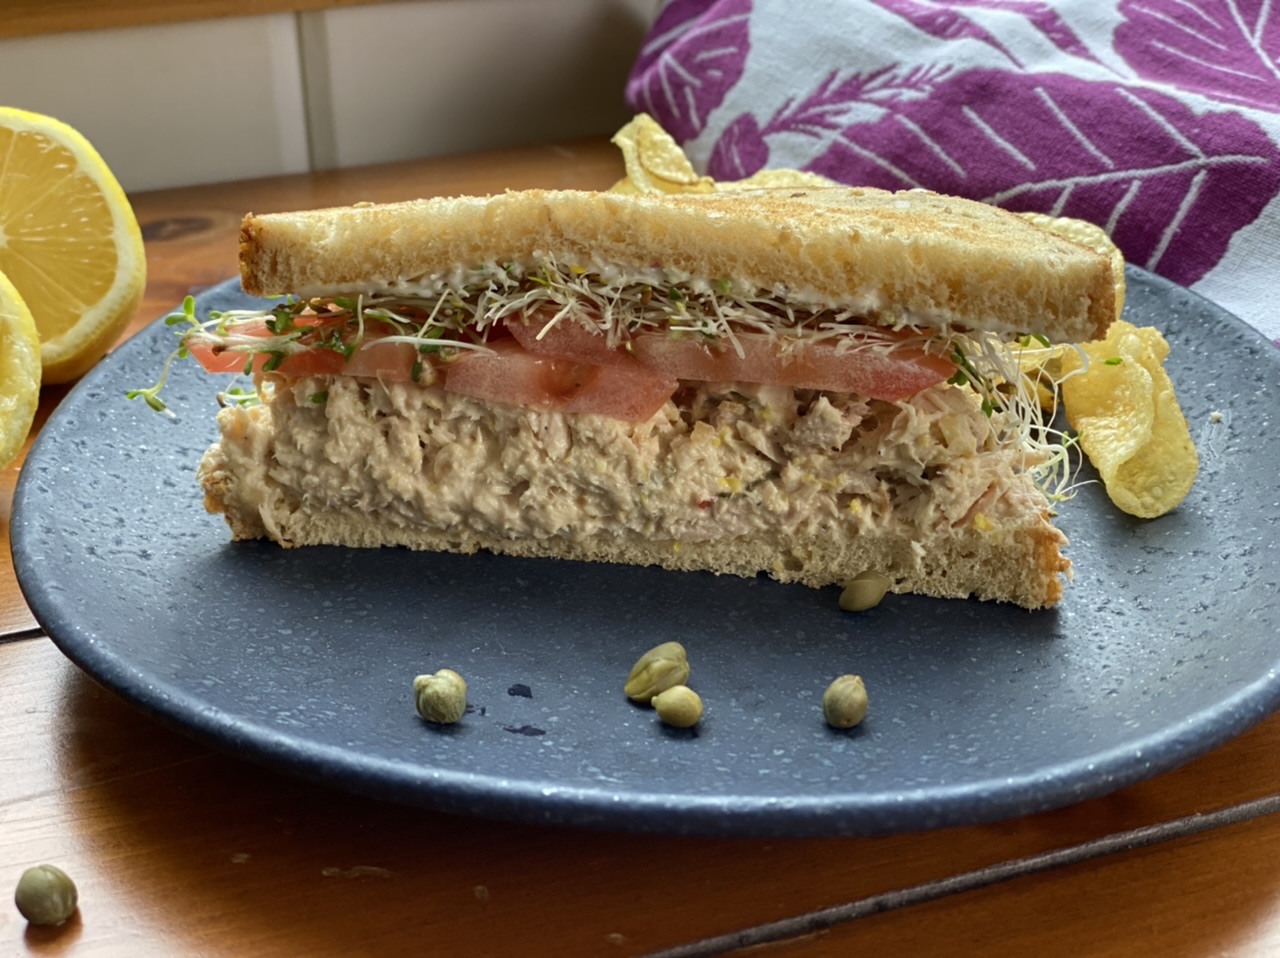 39829A5E CDAE 4E3A 8D77 74CD3104D70D - Fancy Tuna Sandwich with Zesty Browned Butter Aioli